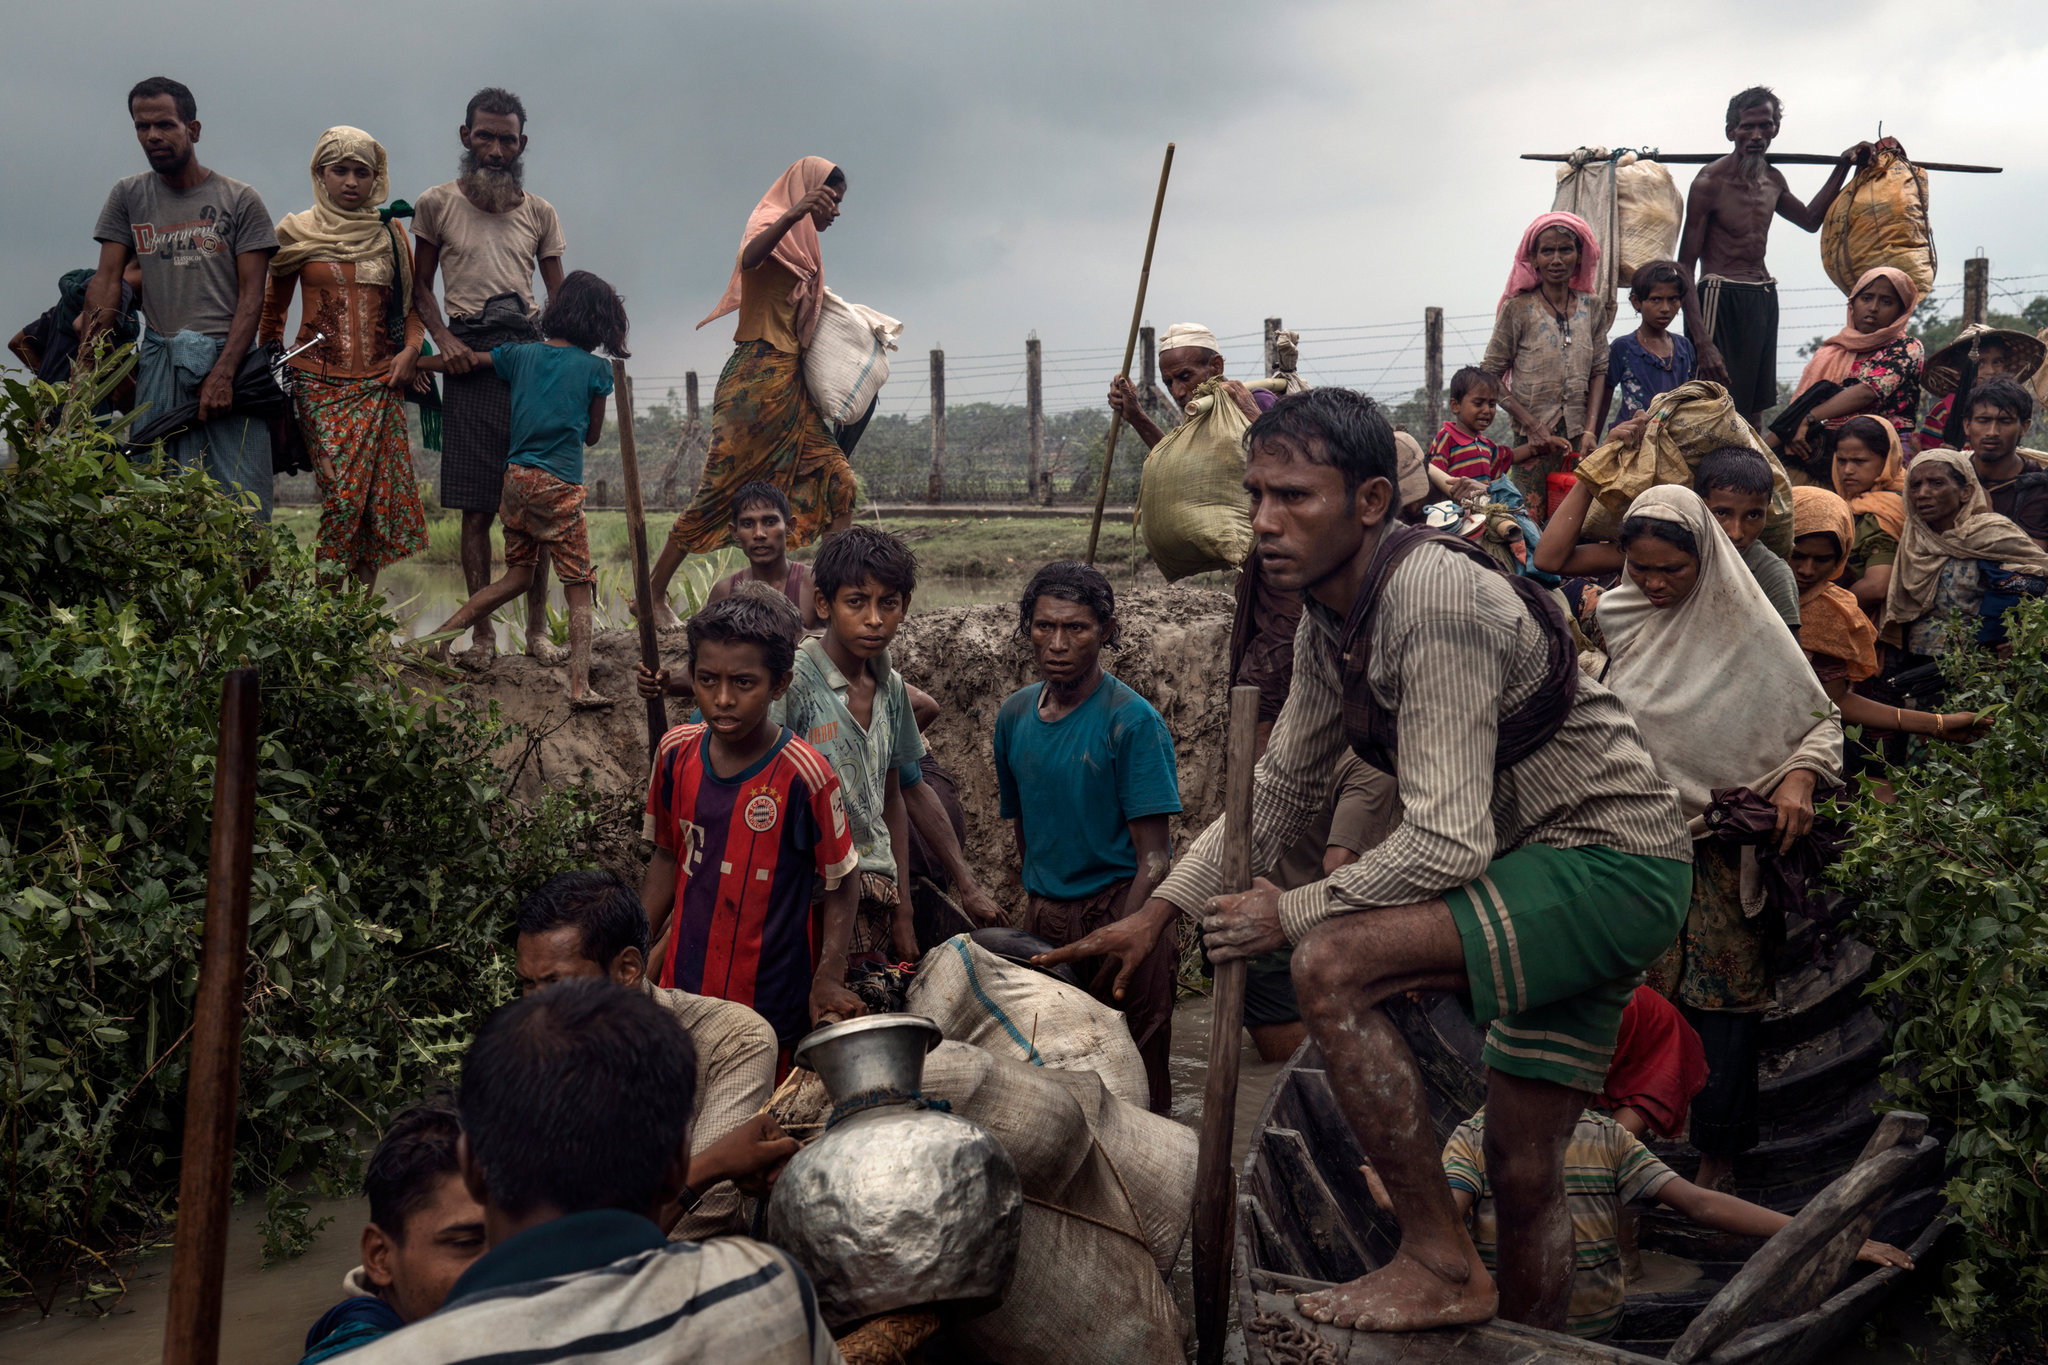 Myanmar’s Military Planned Rohingya Genocide, Rights Group Says